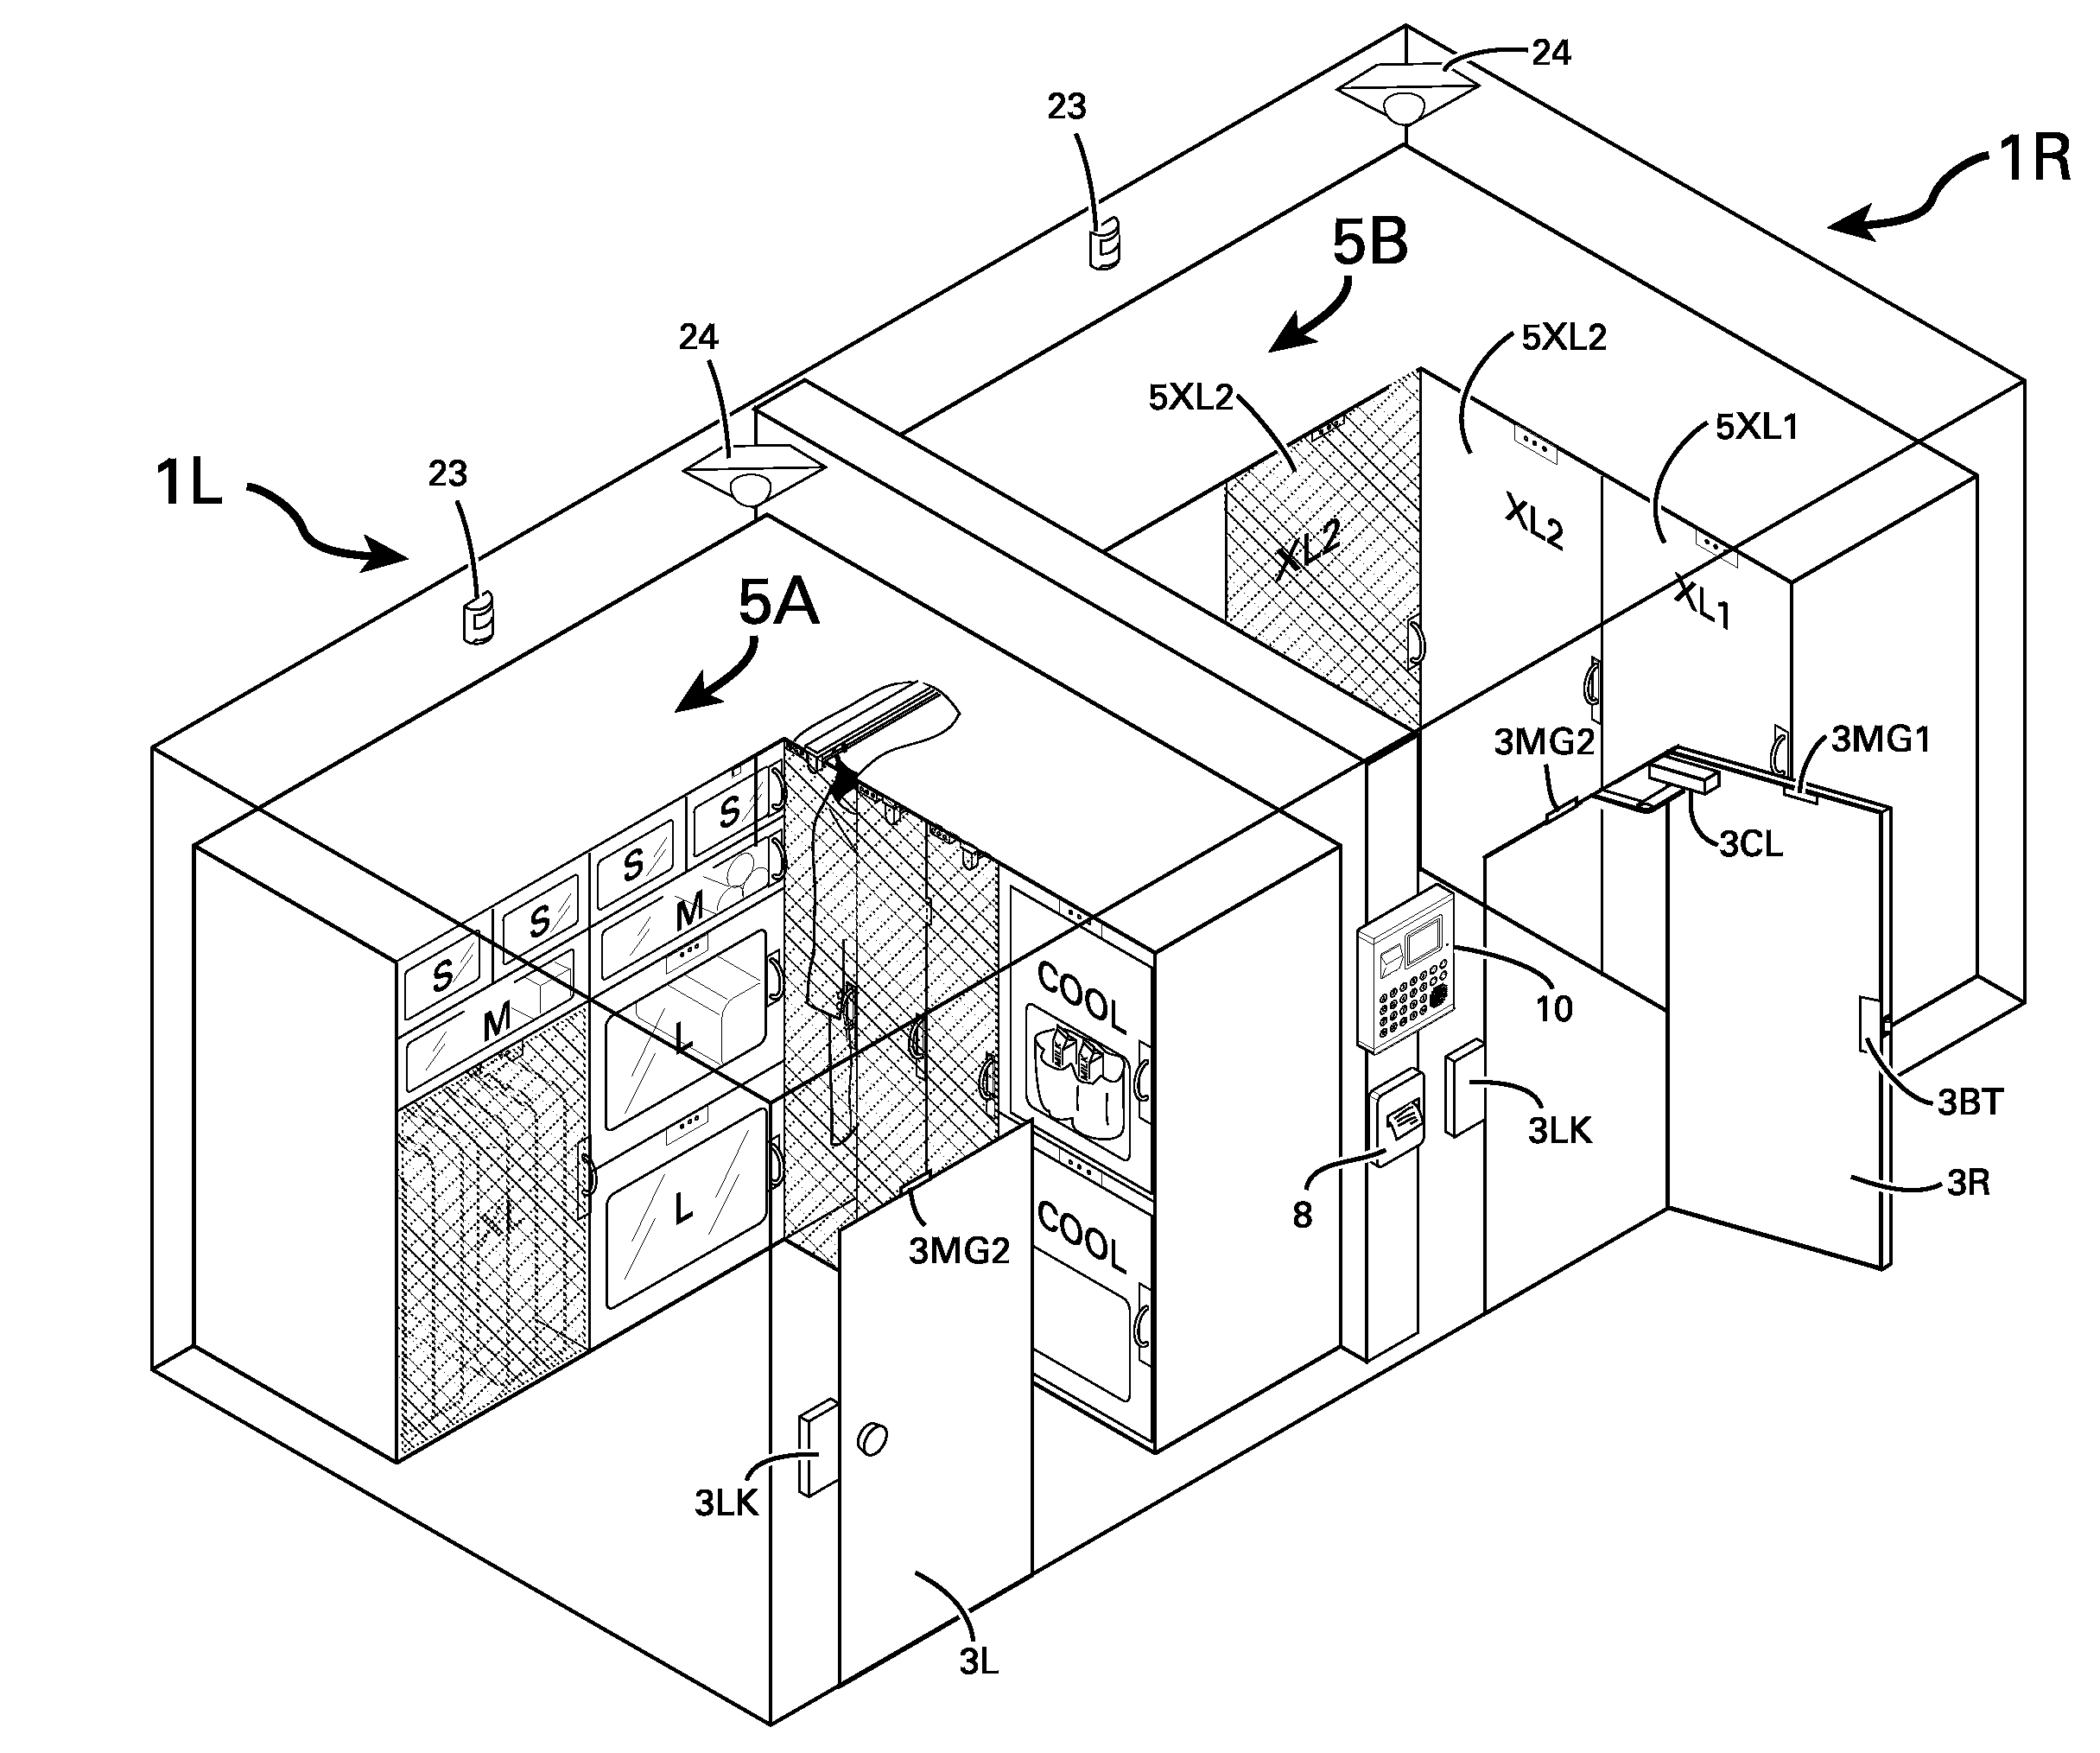 Method and Apparatus for Connecting and Operating Lockers for Home Deliveries via Video Interphones and Remotely Via a Virtual Doorman